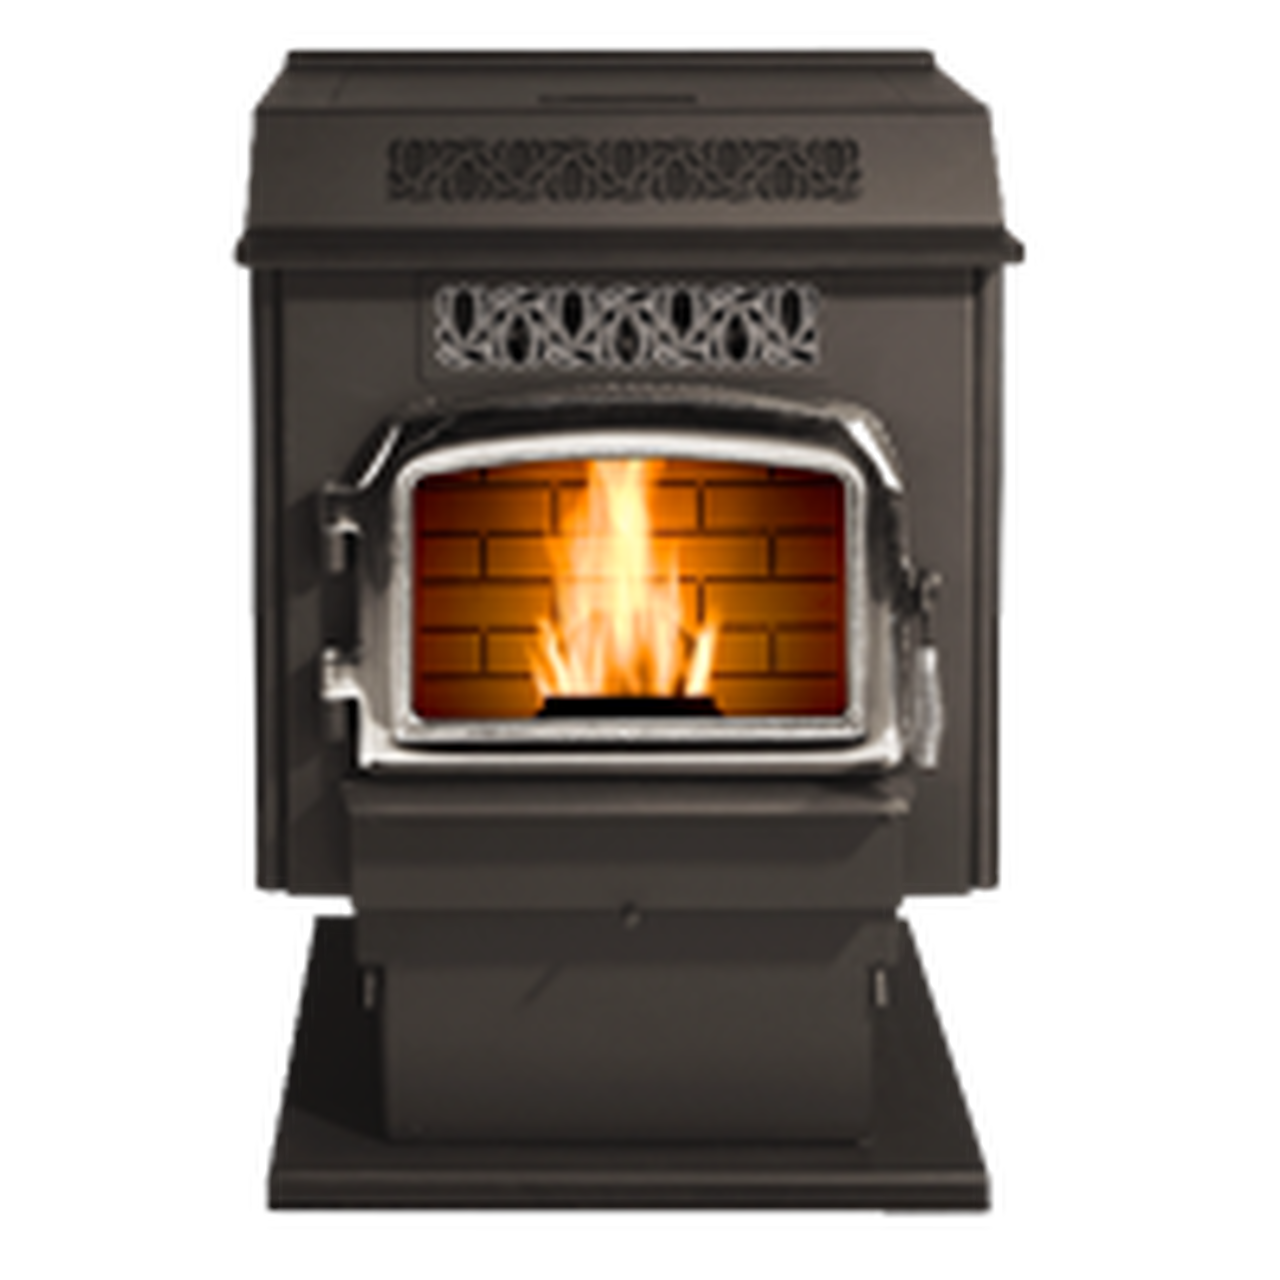 Majestic Gas Fireplace Parts Inspirational St Croix Prescott Ex Pellet Stove Parts Free Shipping On